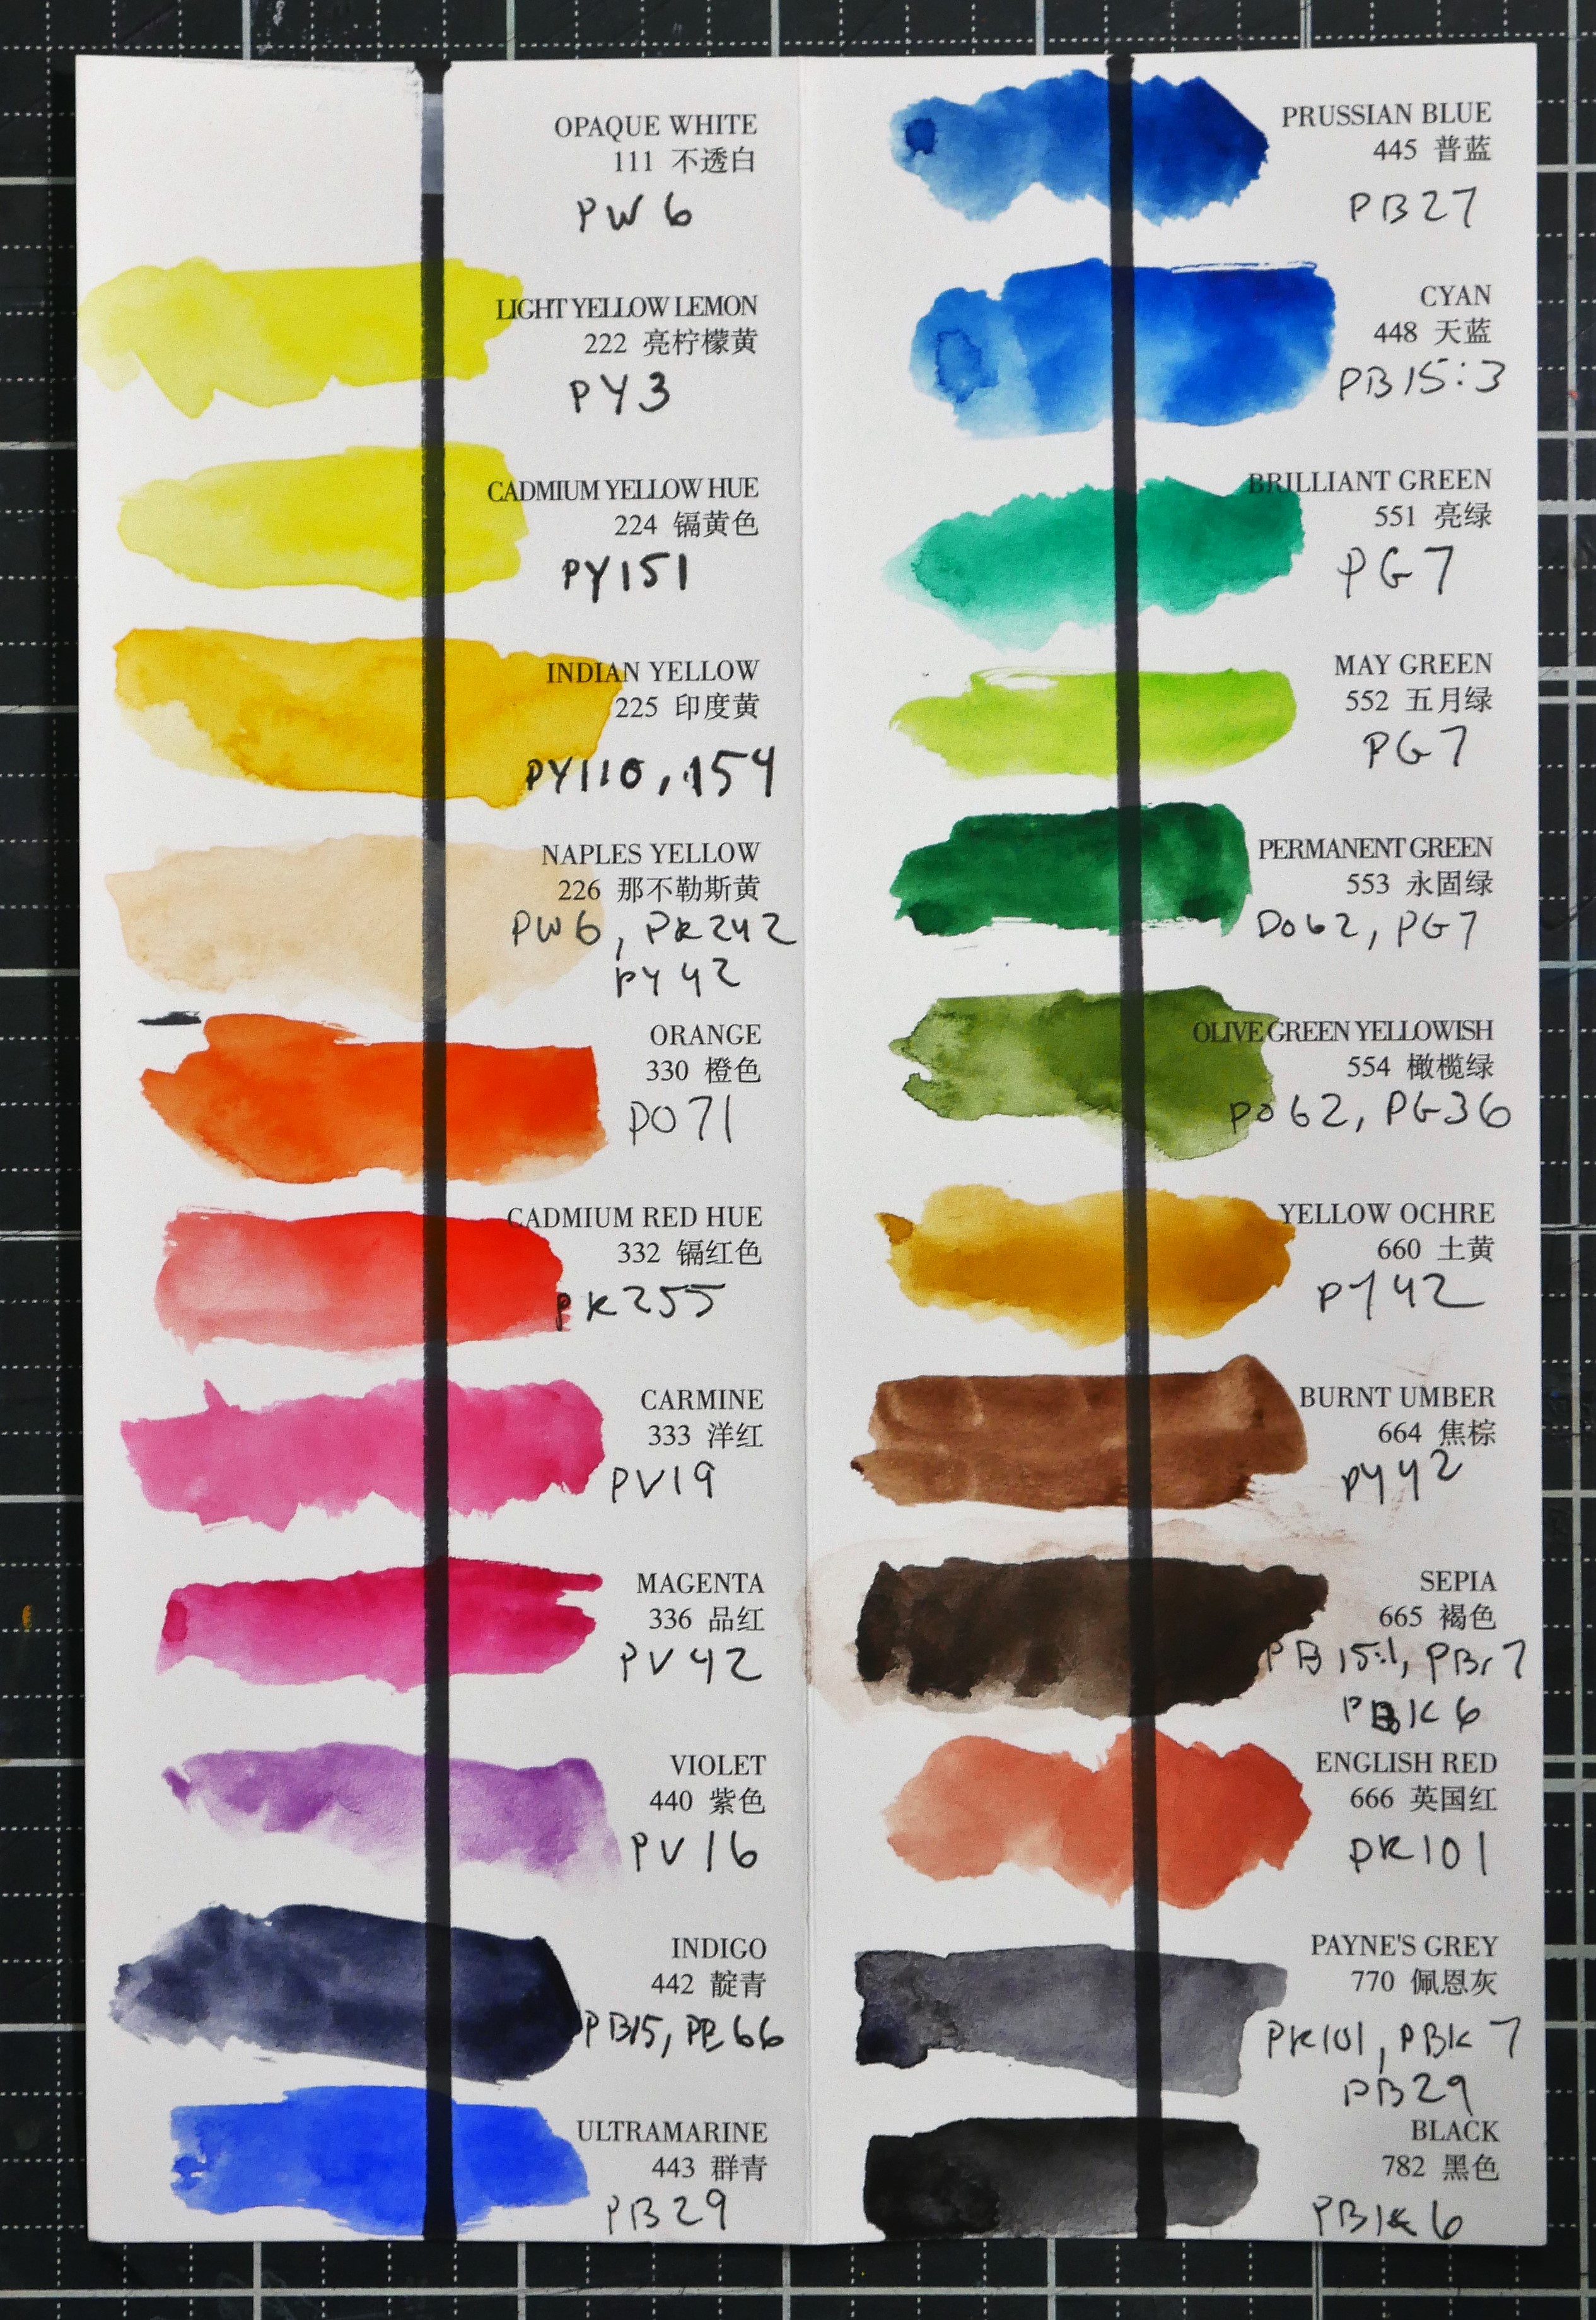 Unboxing and Swatching: Basics Permanent Marker 